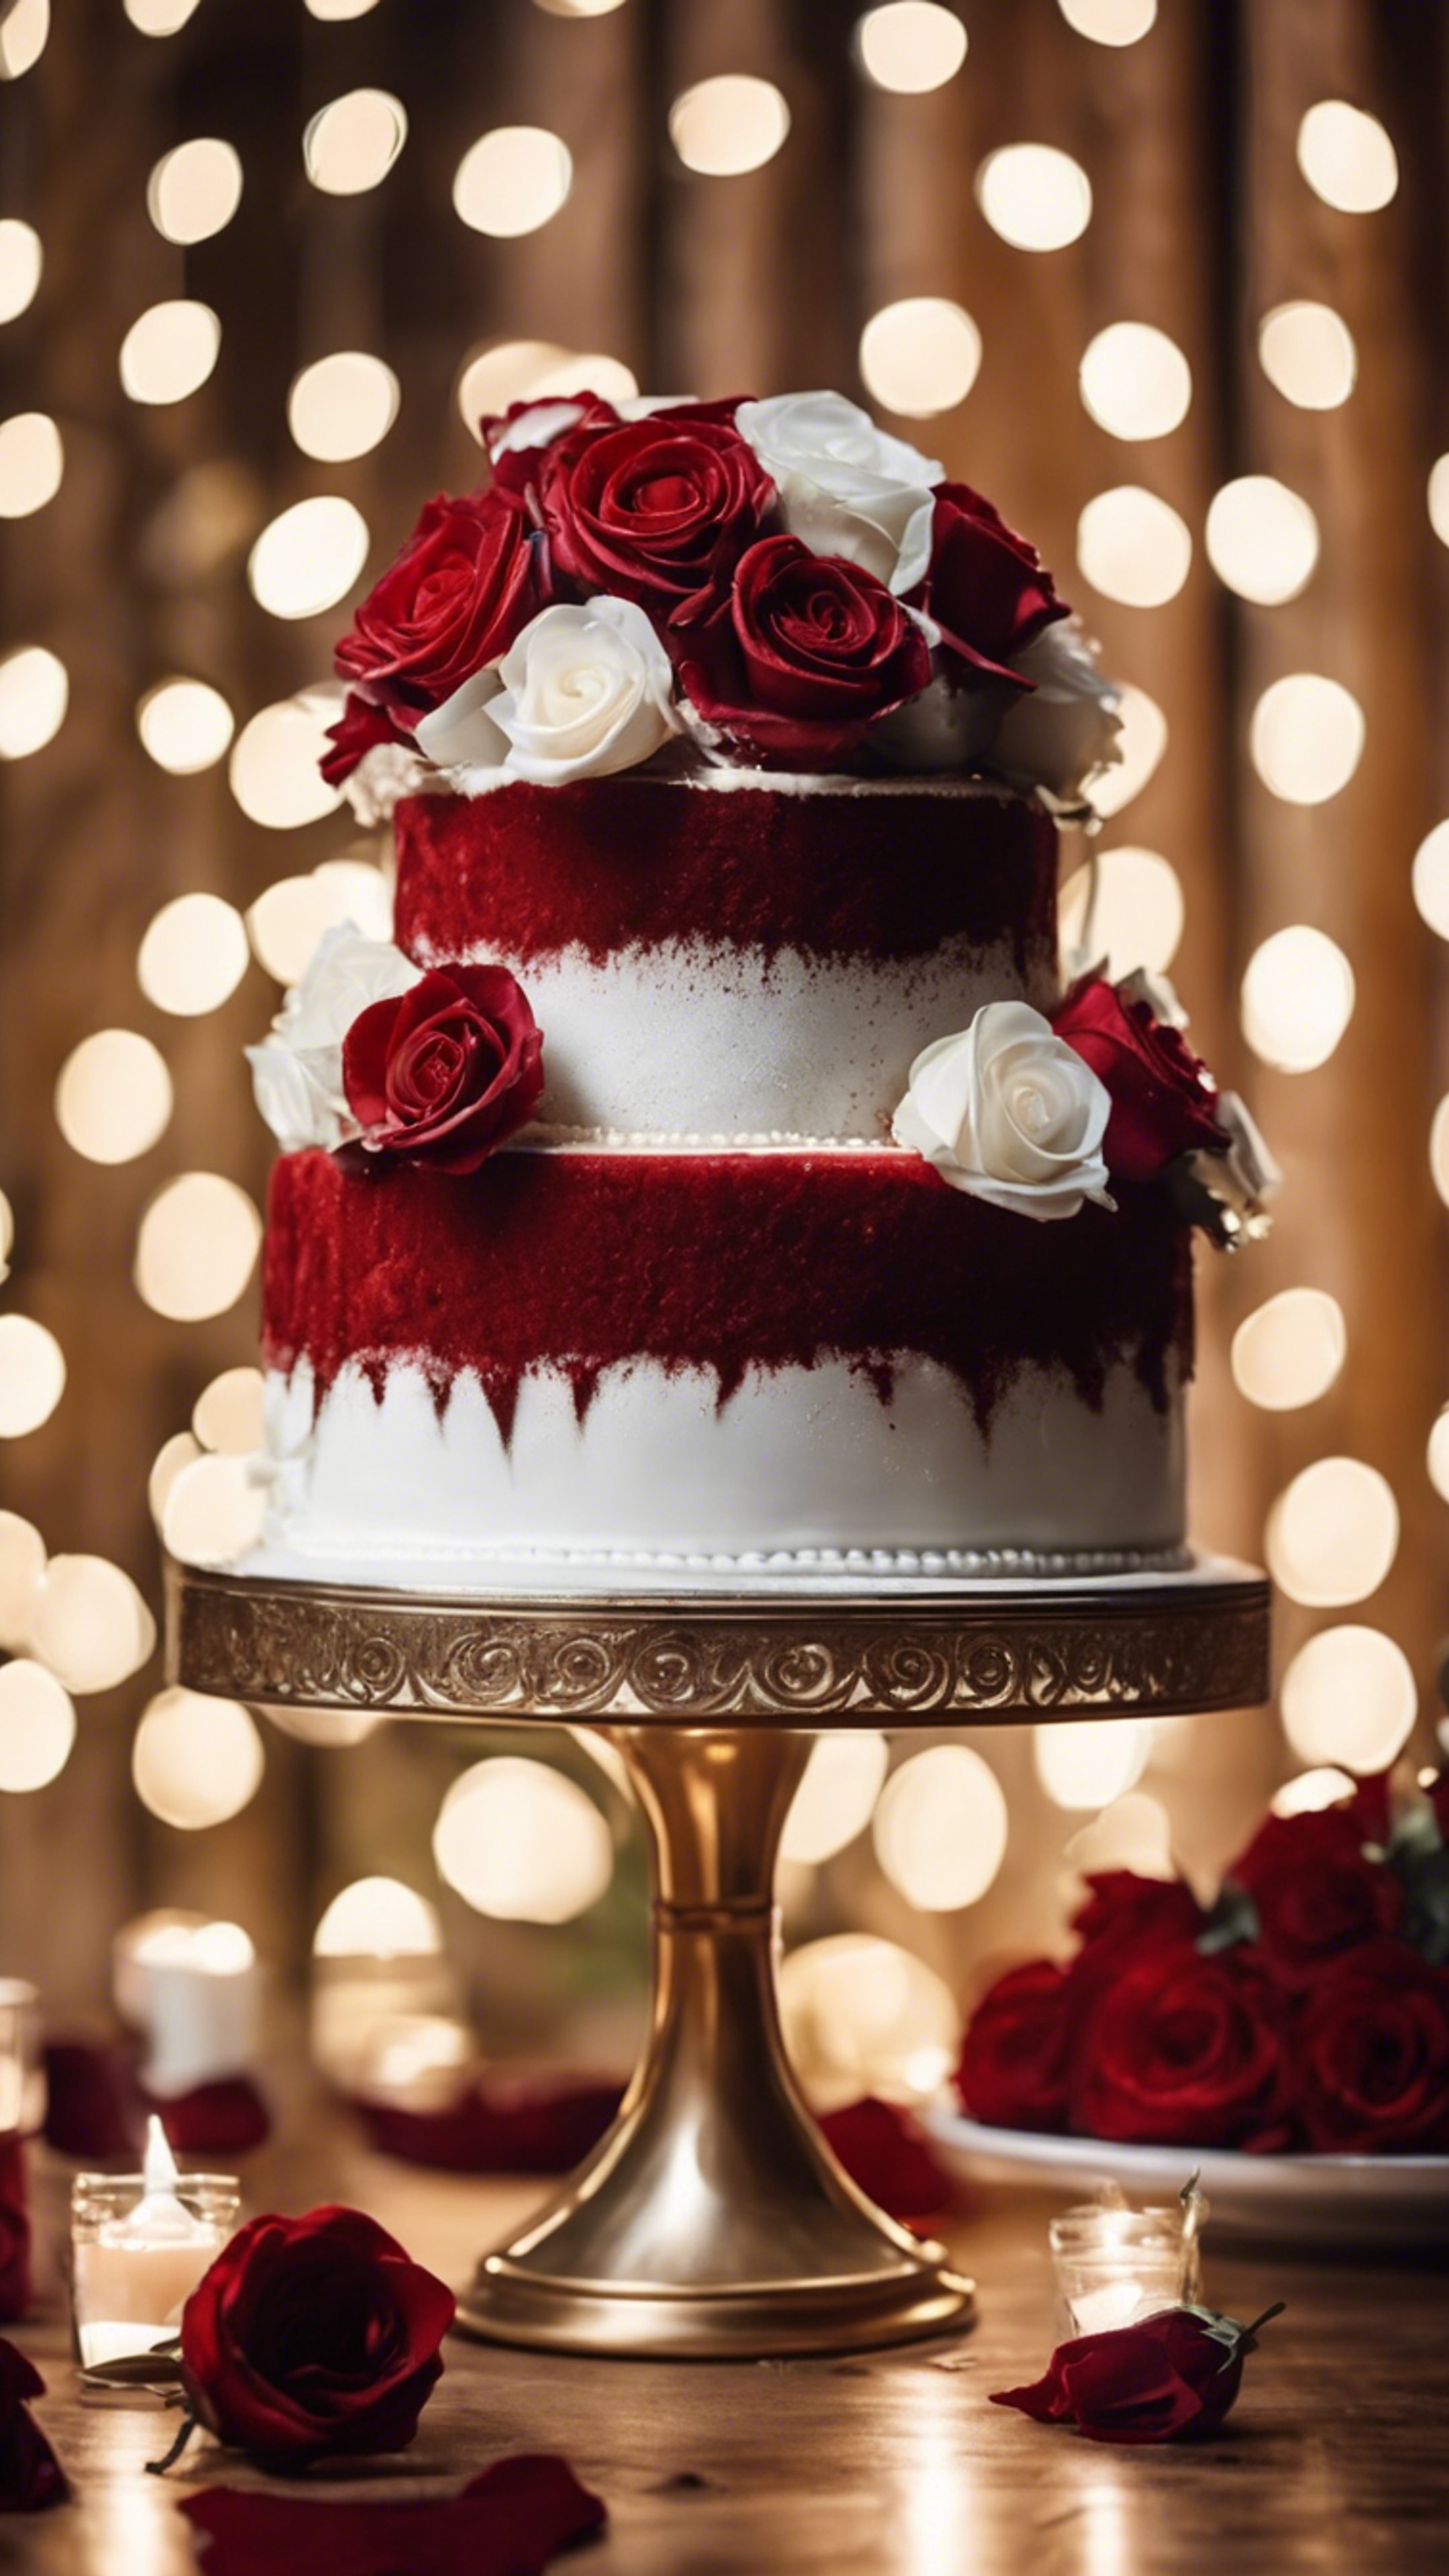 Three-tiered red velvet wedding cake adorned with white roses, against a backdrop of twinkling fairy lights. Tapet[b48557e9e8f84a90b888]